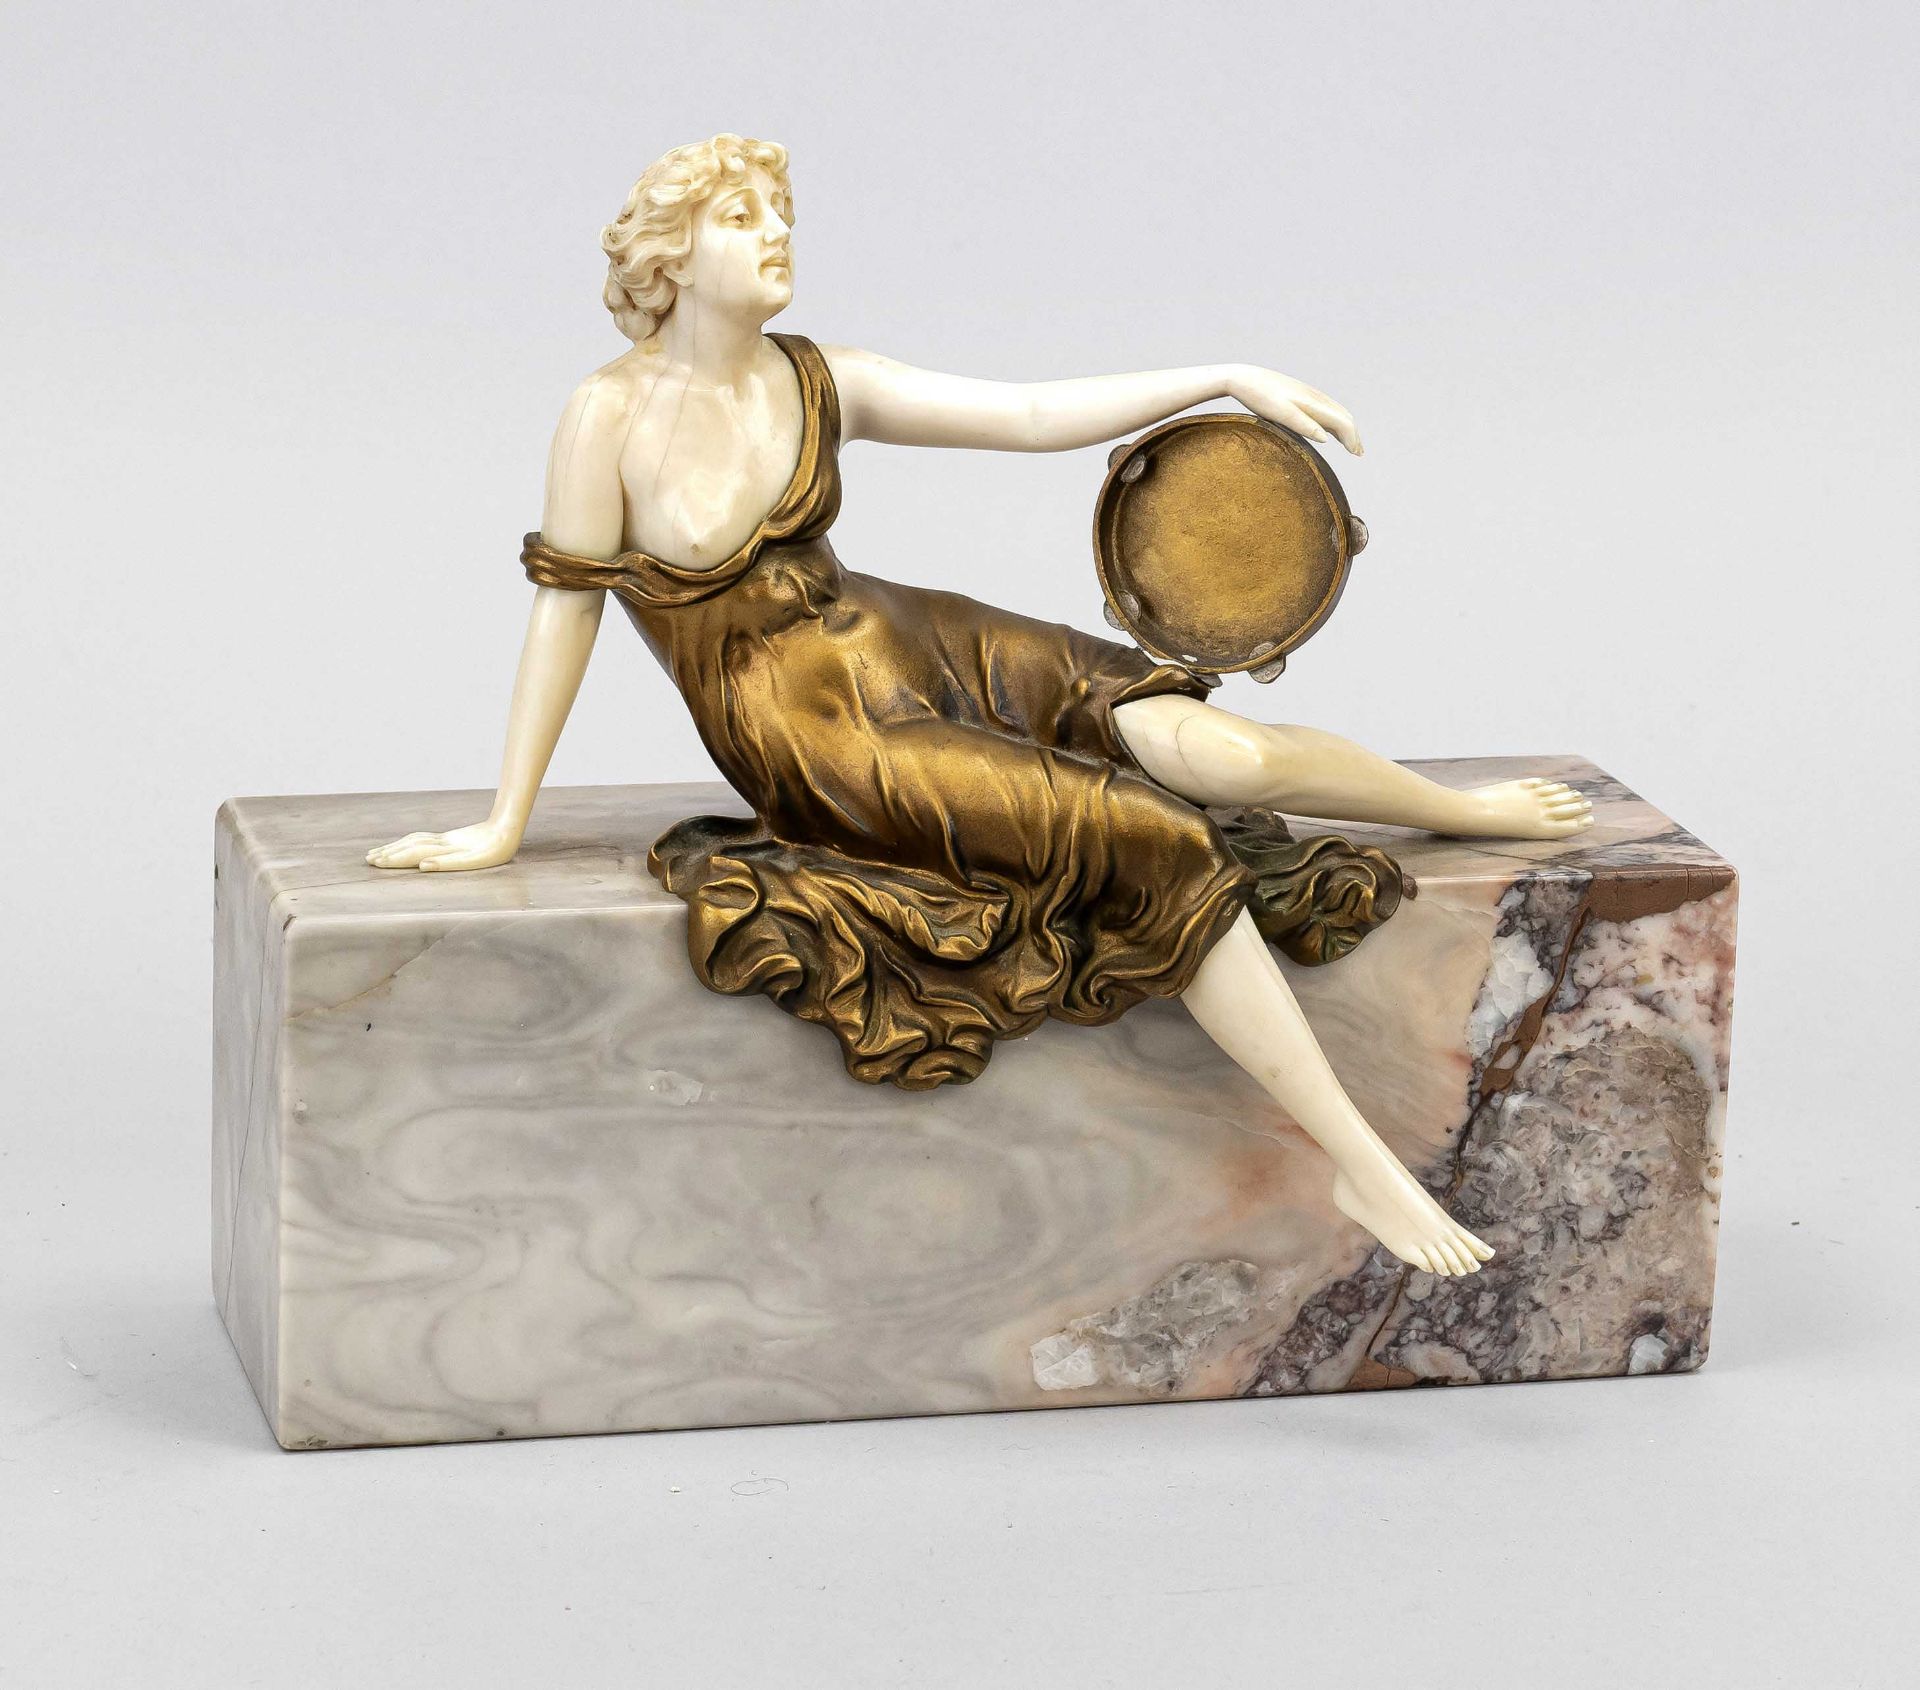 Ferdinand Preiss (1882-1943), reclining woman with tambourine and bare breast, patinated bronze